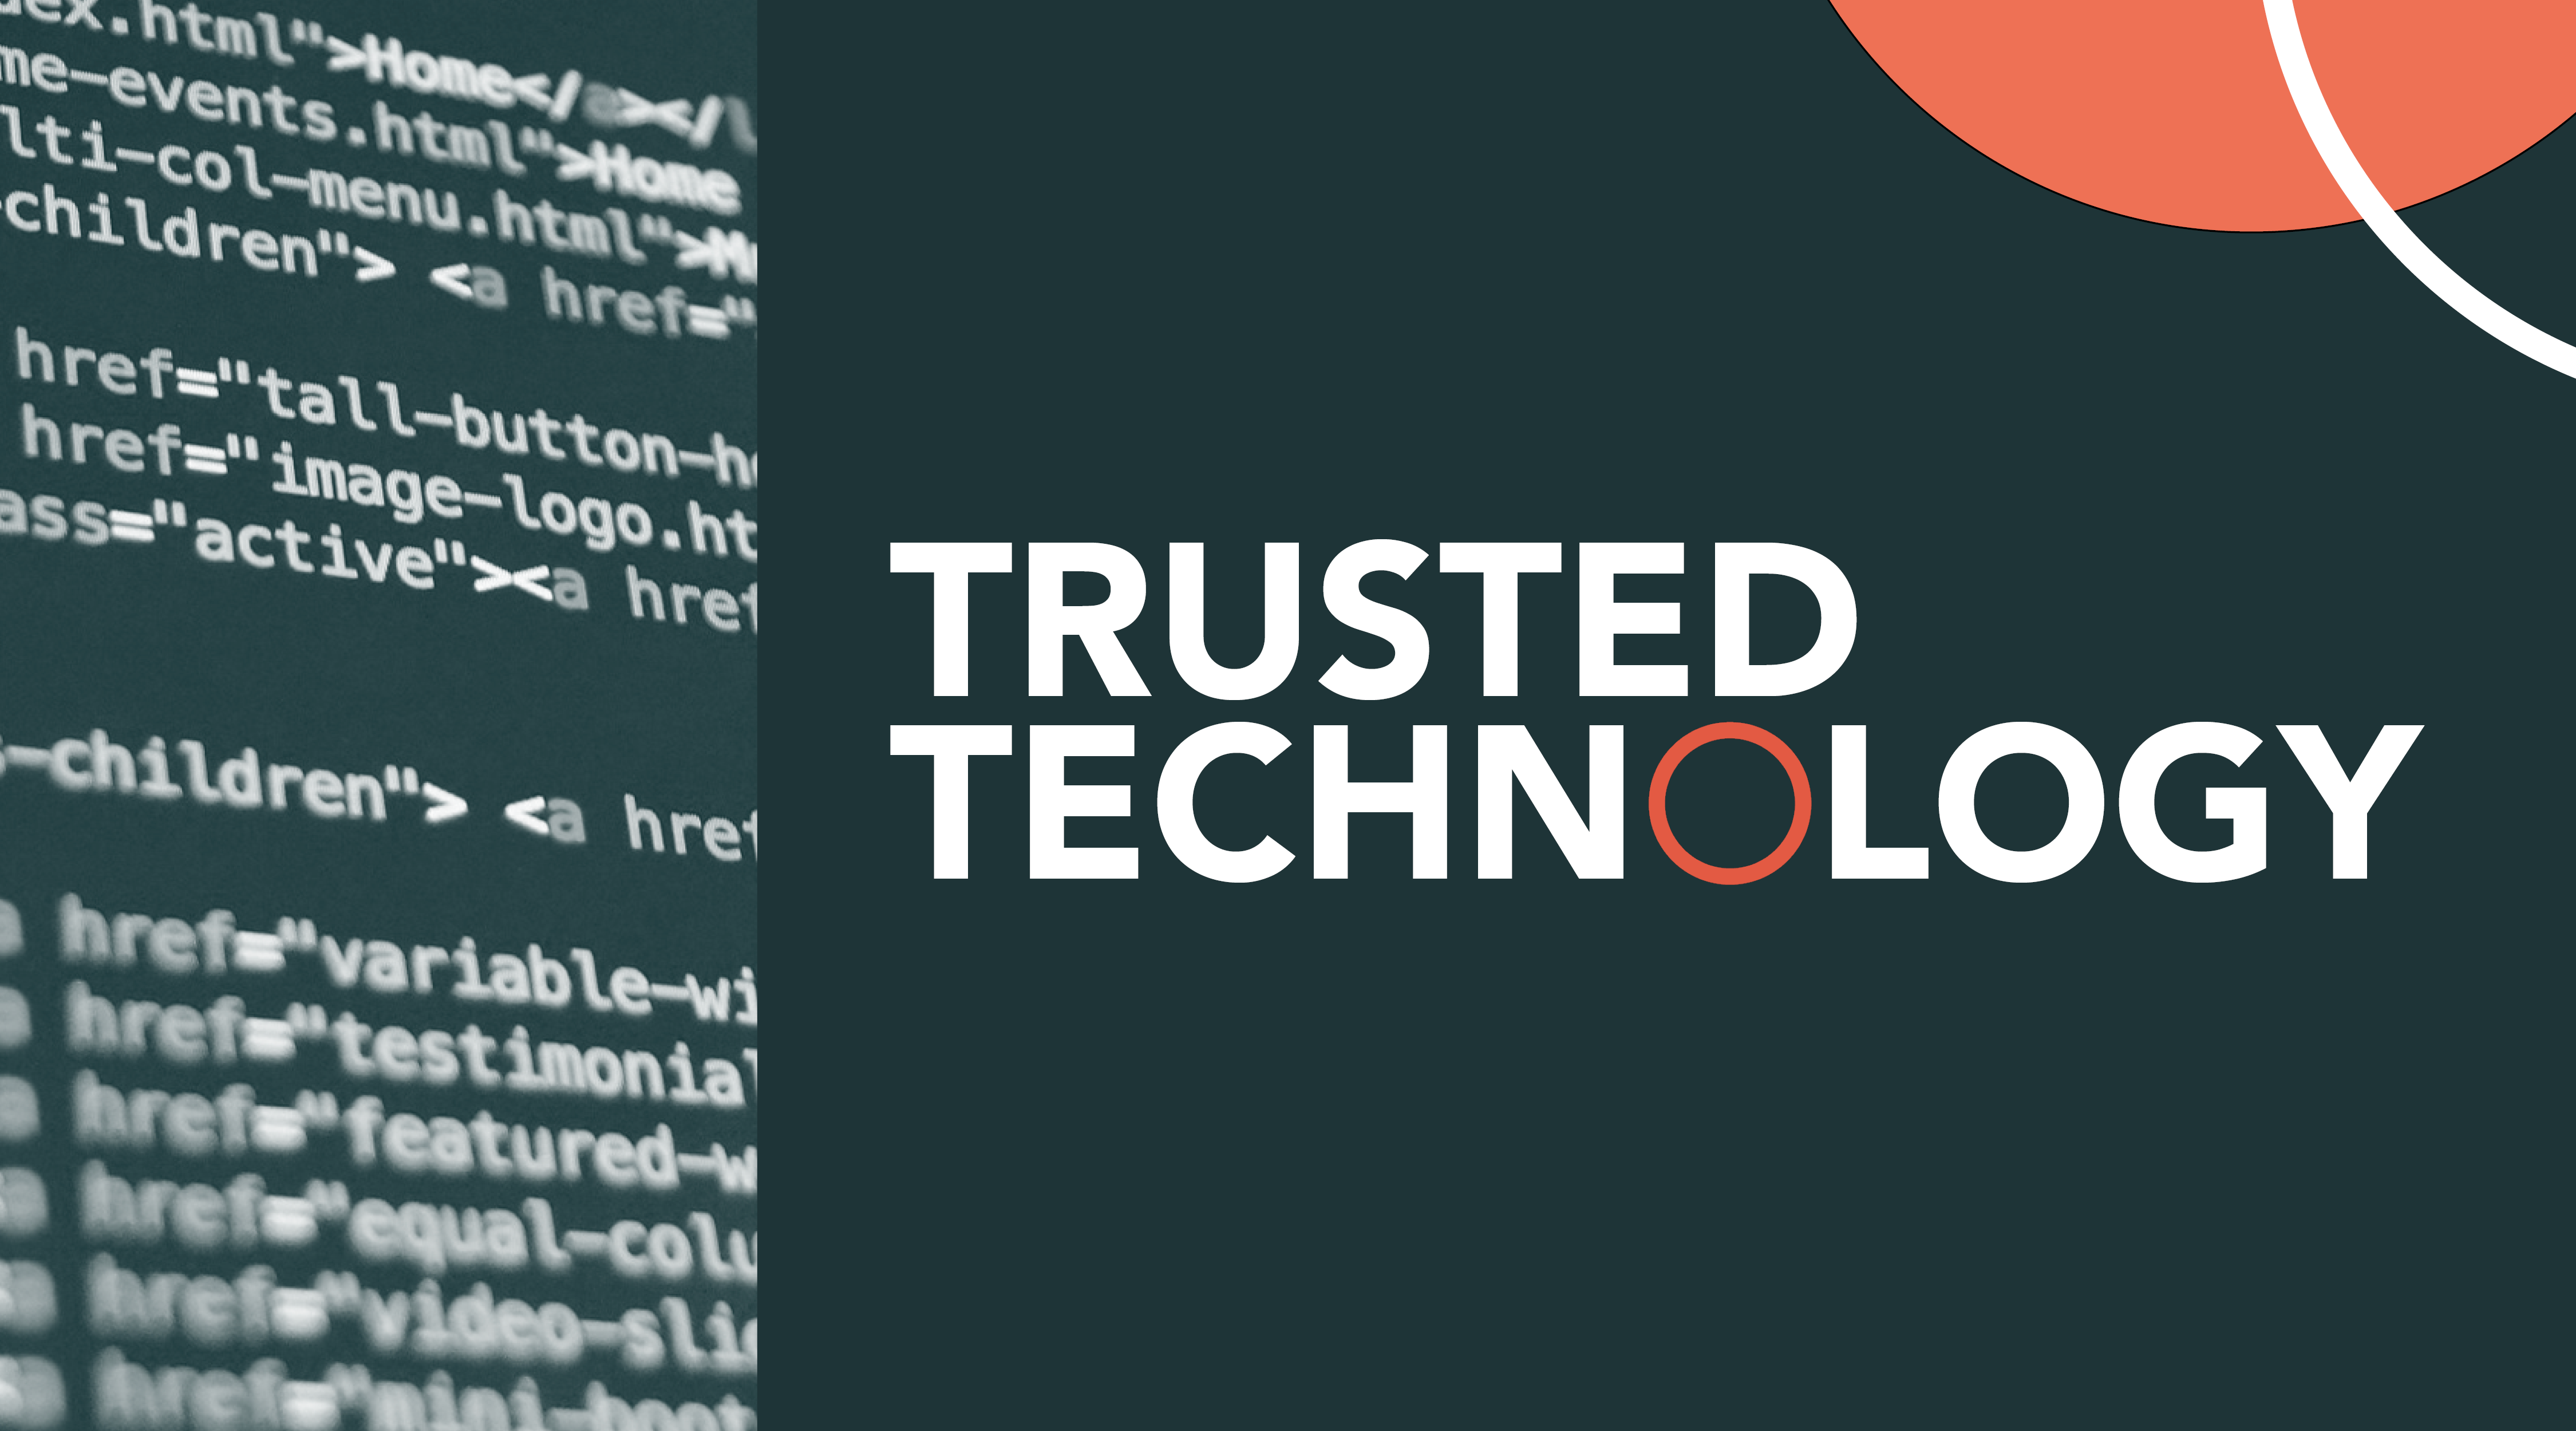 More Trustworthy Technology, in which technological progress aligns with the needs and values of citizens